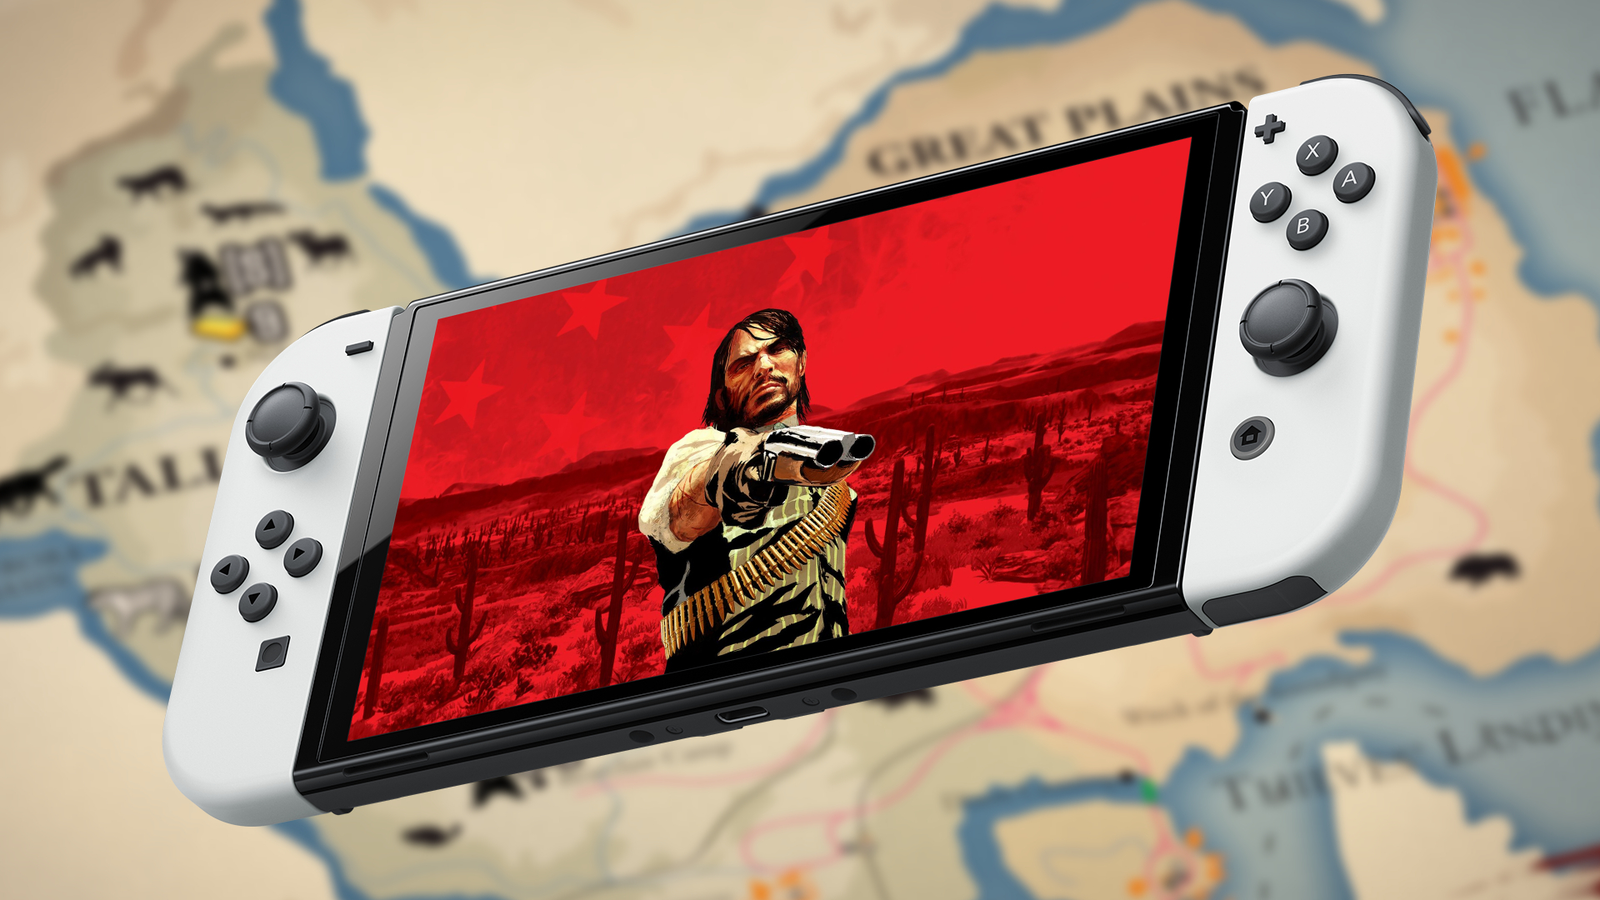 How to pre-order Red Dead Redemption and Undead Nightmare on PS4 and  Nintendo Switch